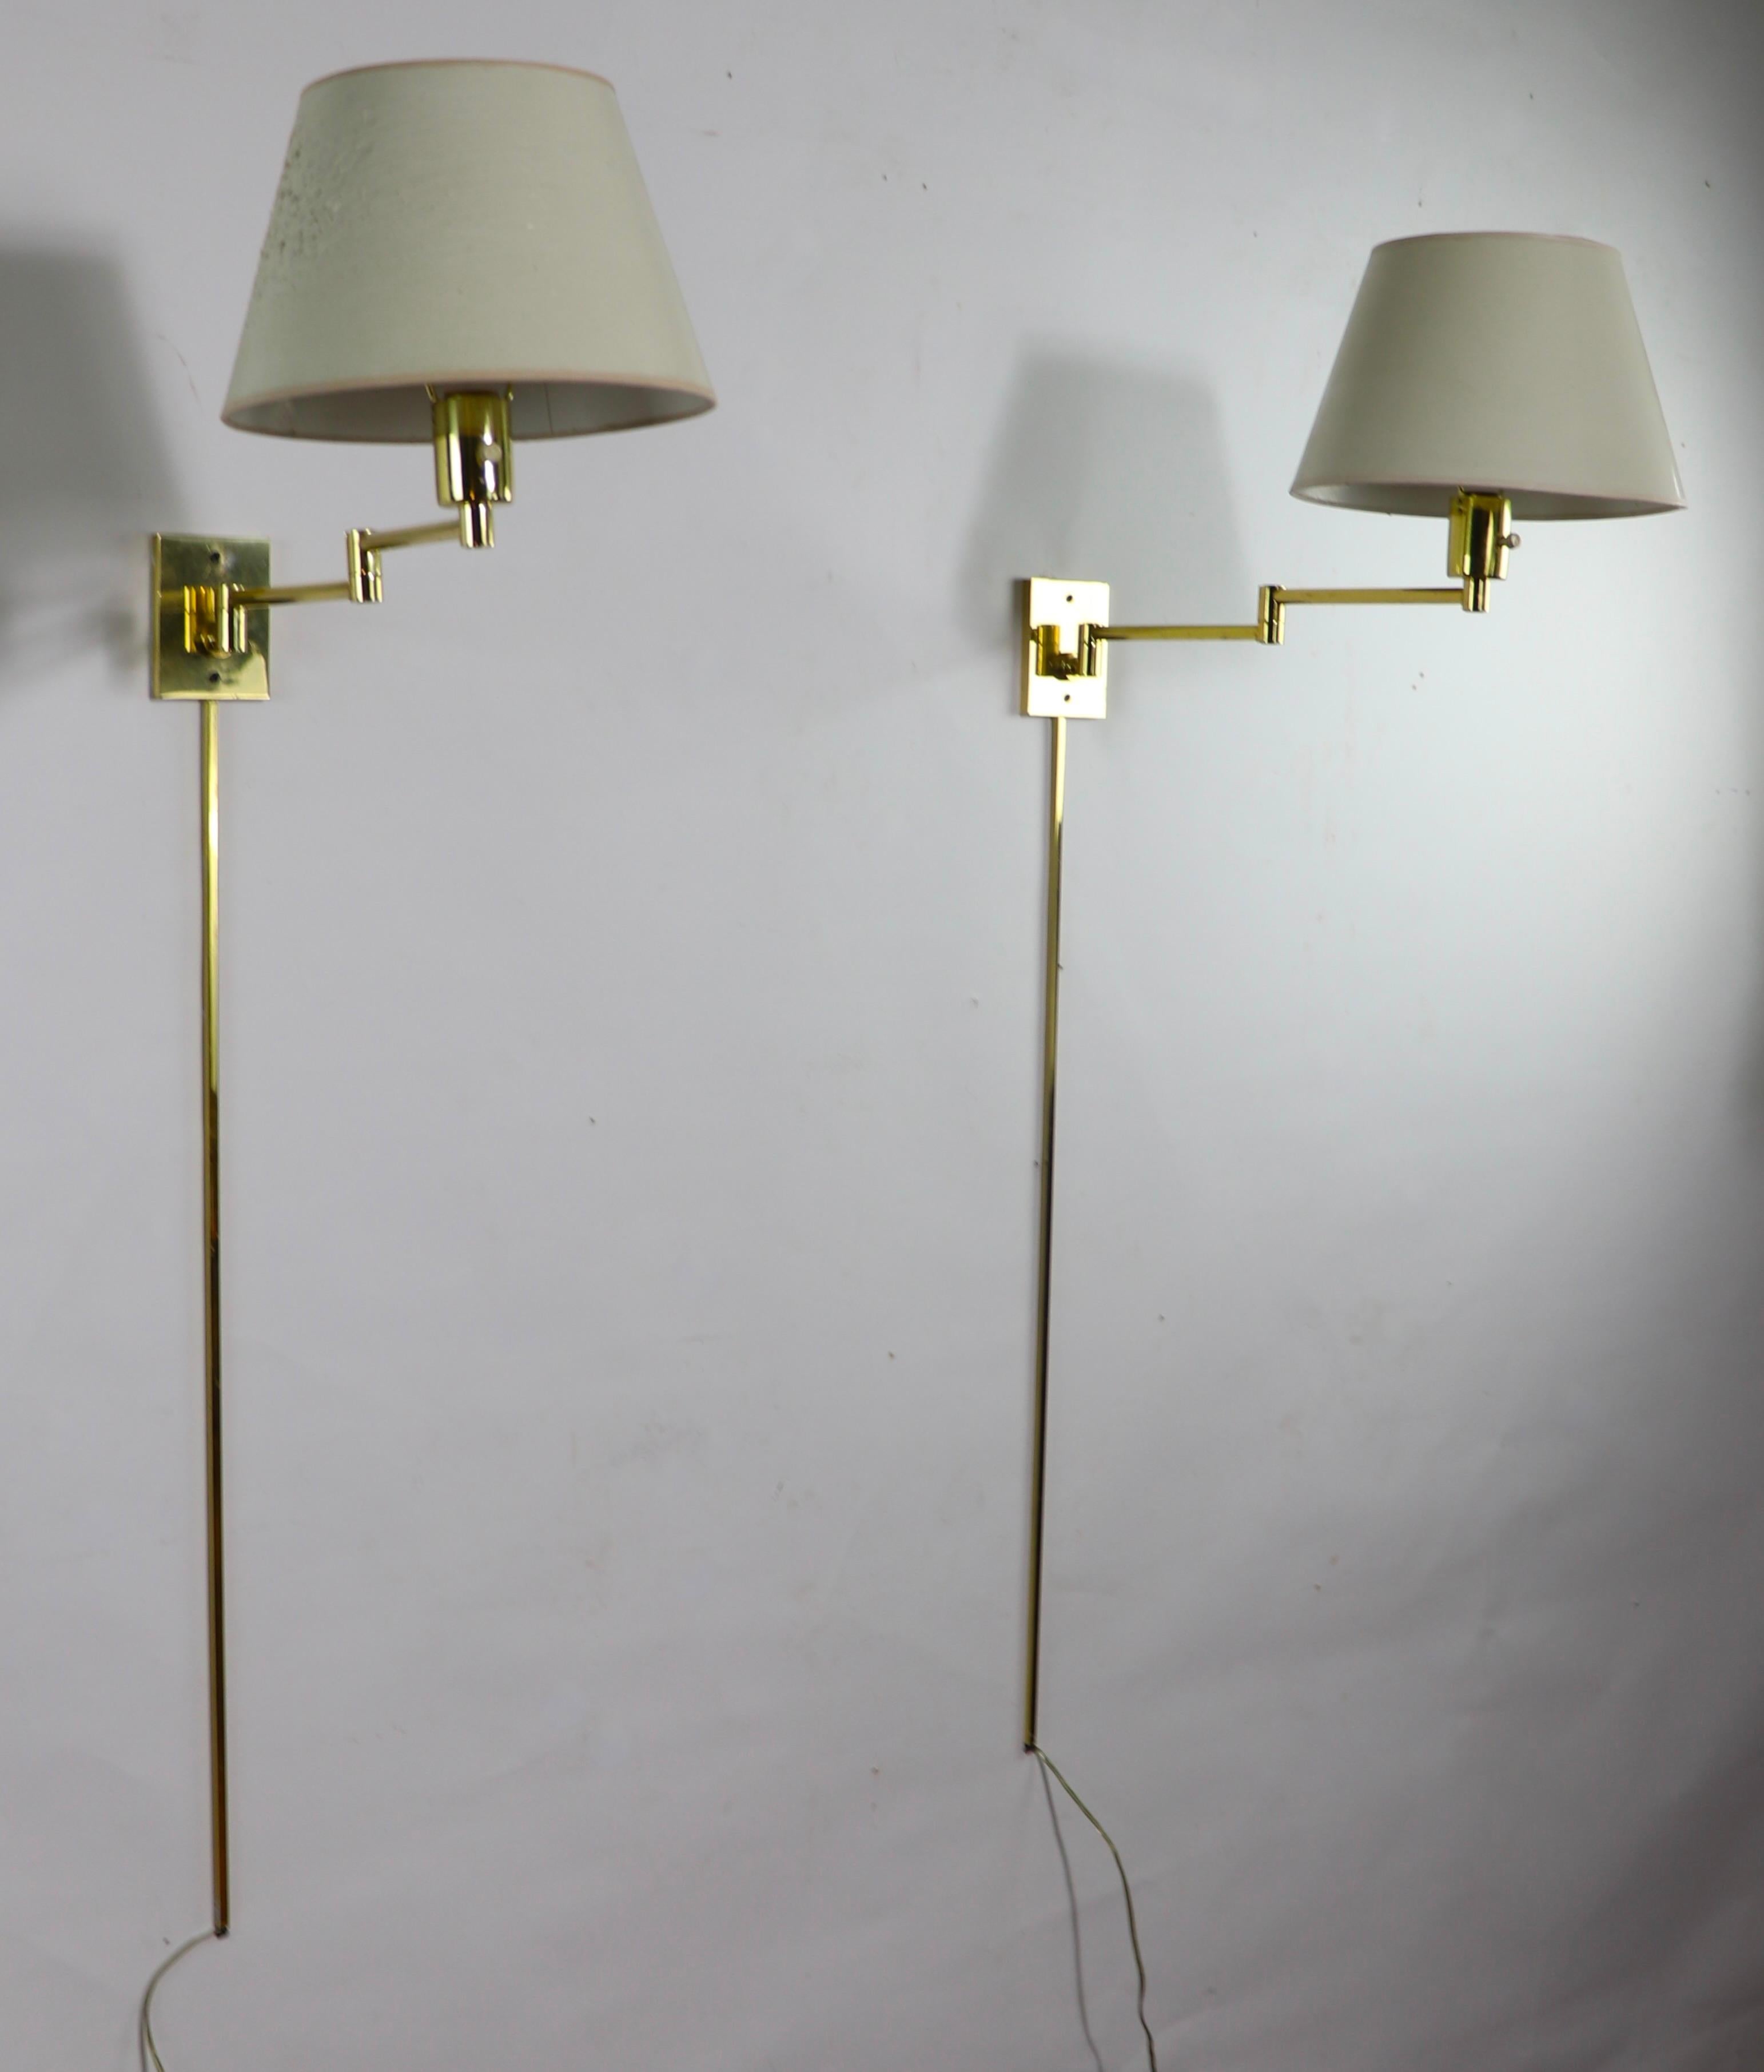 Elegant, sophisticated, and chic, this pair of solid brass wall m mount sconces feature a jointed flex arm, which is mounted to a rectangular brass faceplate, which attaches to the wall. Extending down from the faceplate are the original brass wire